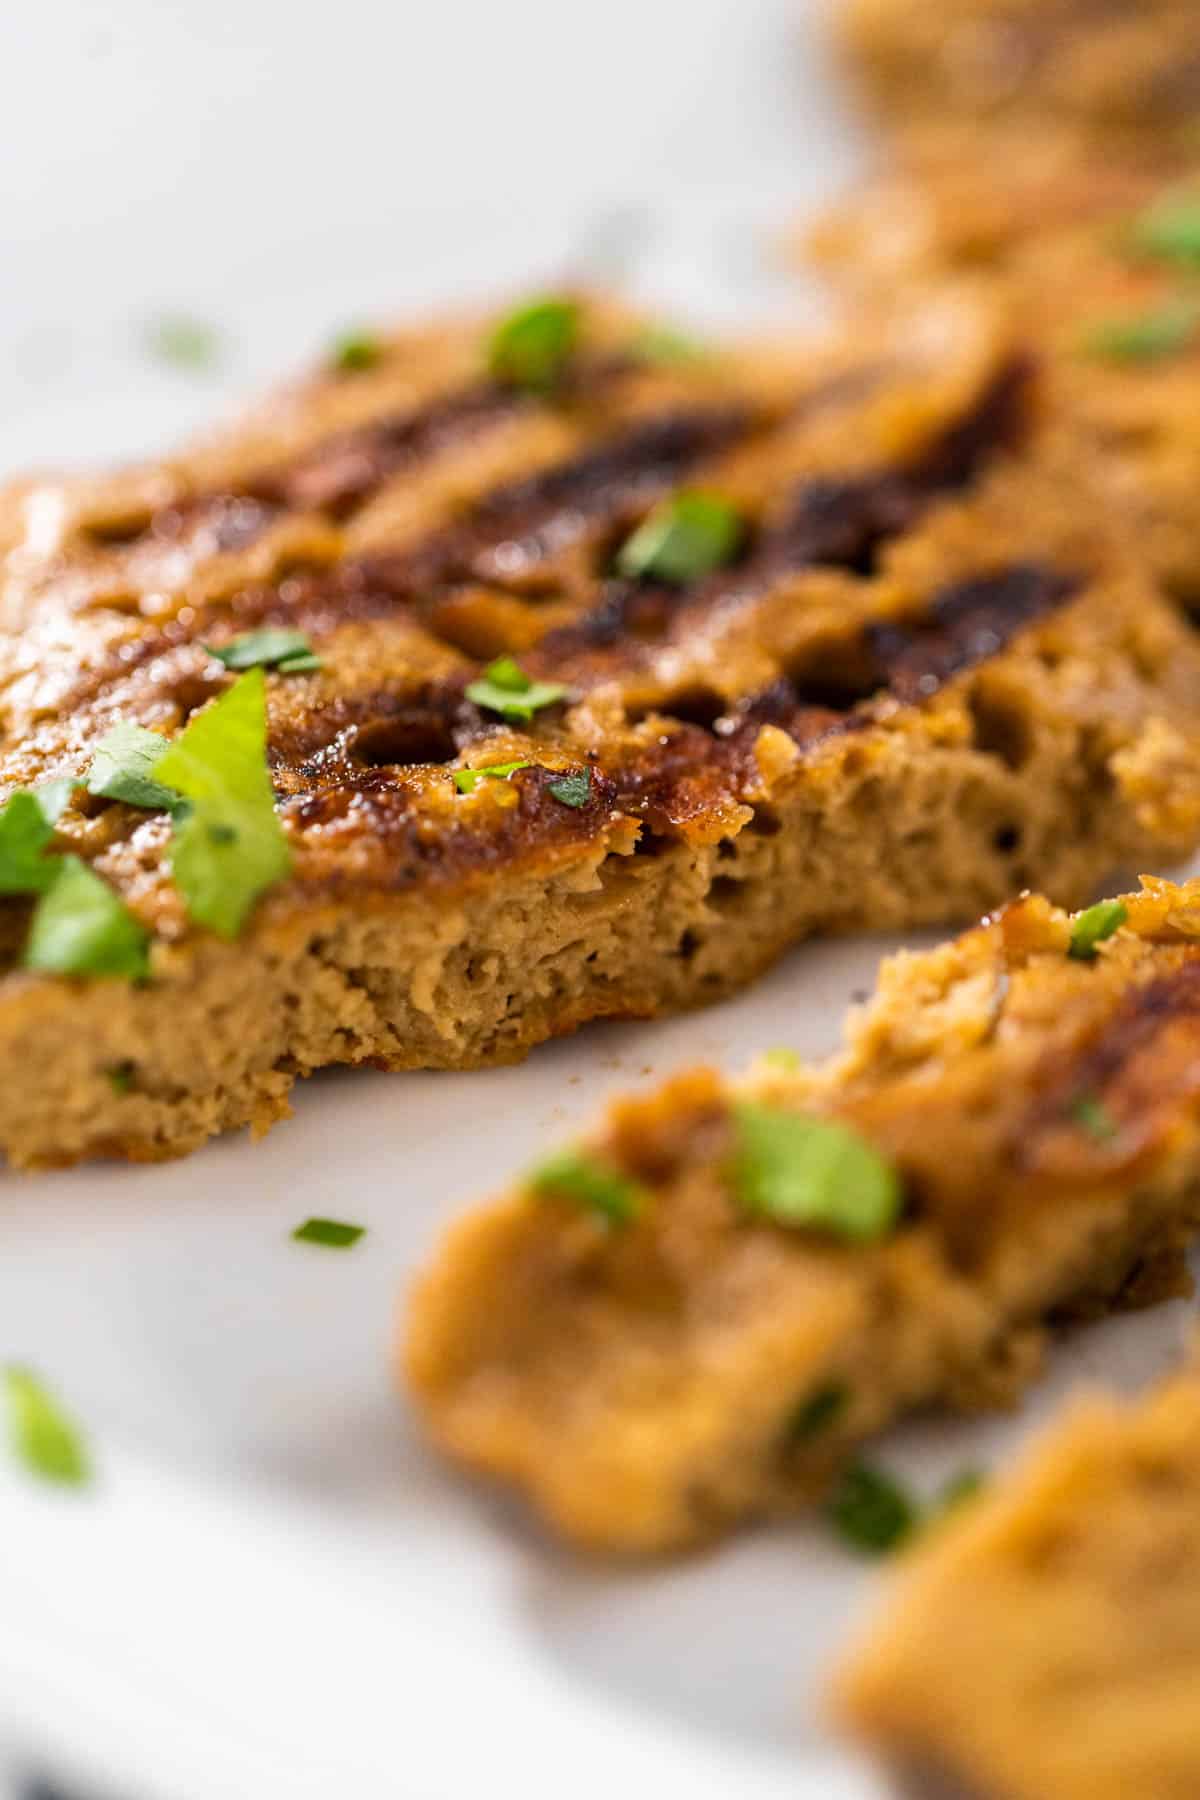 A close up of a seitan chicken cutlet to show the texture.